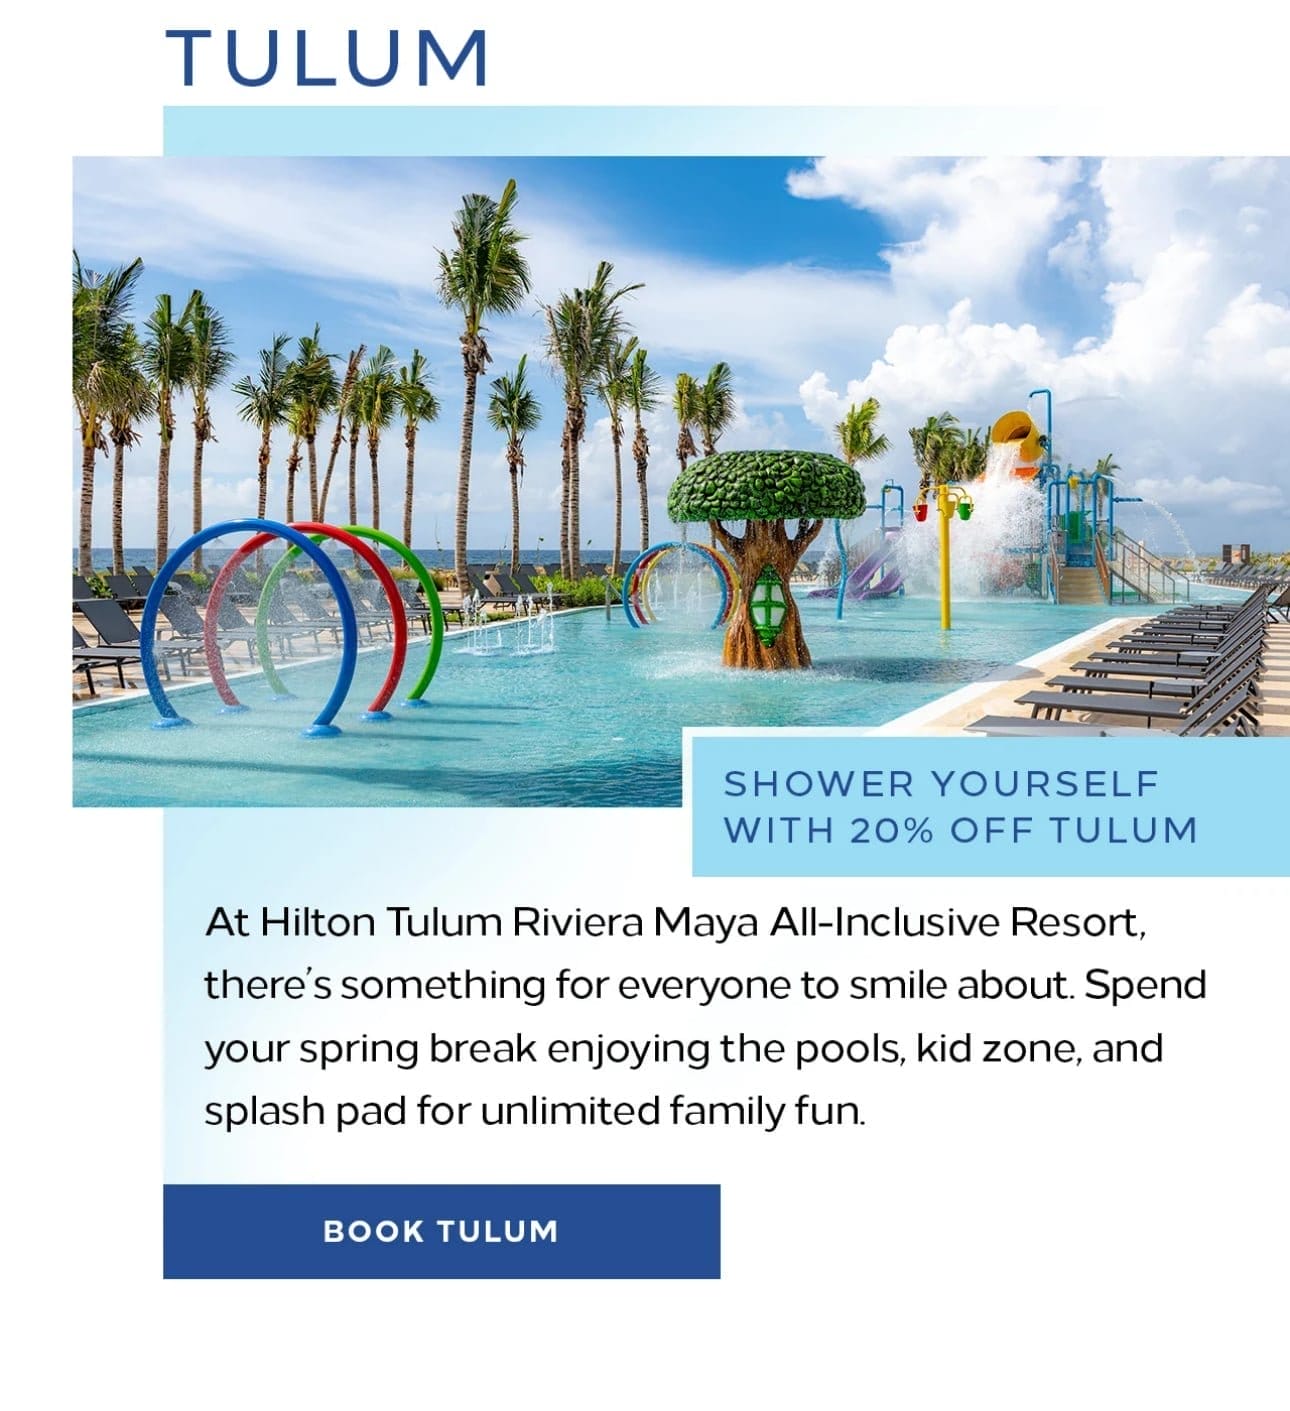  Tulum. At Hilton Tulum Riviera Maya All-Inclusive Resort, there’s something for everyone to smile about. spend your spring break enjoying the pools, kid zone, and splash pad for unlimited family fun. Book Tulum. 